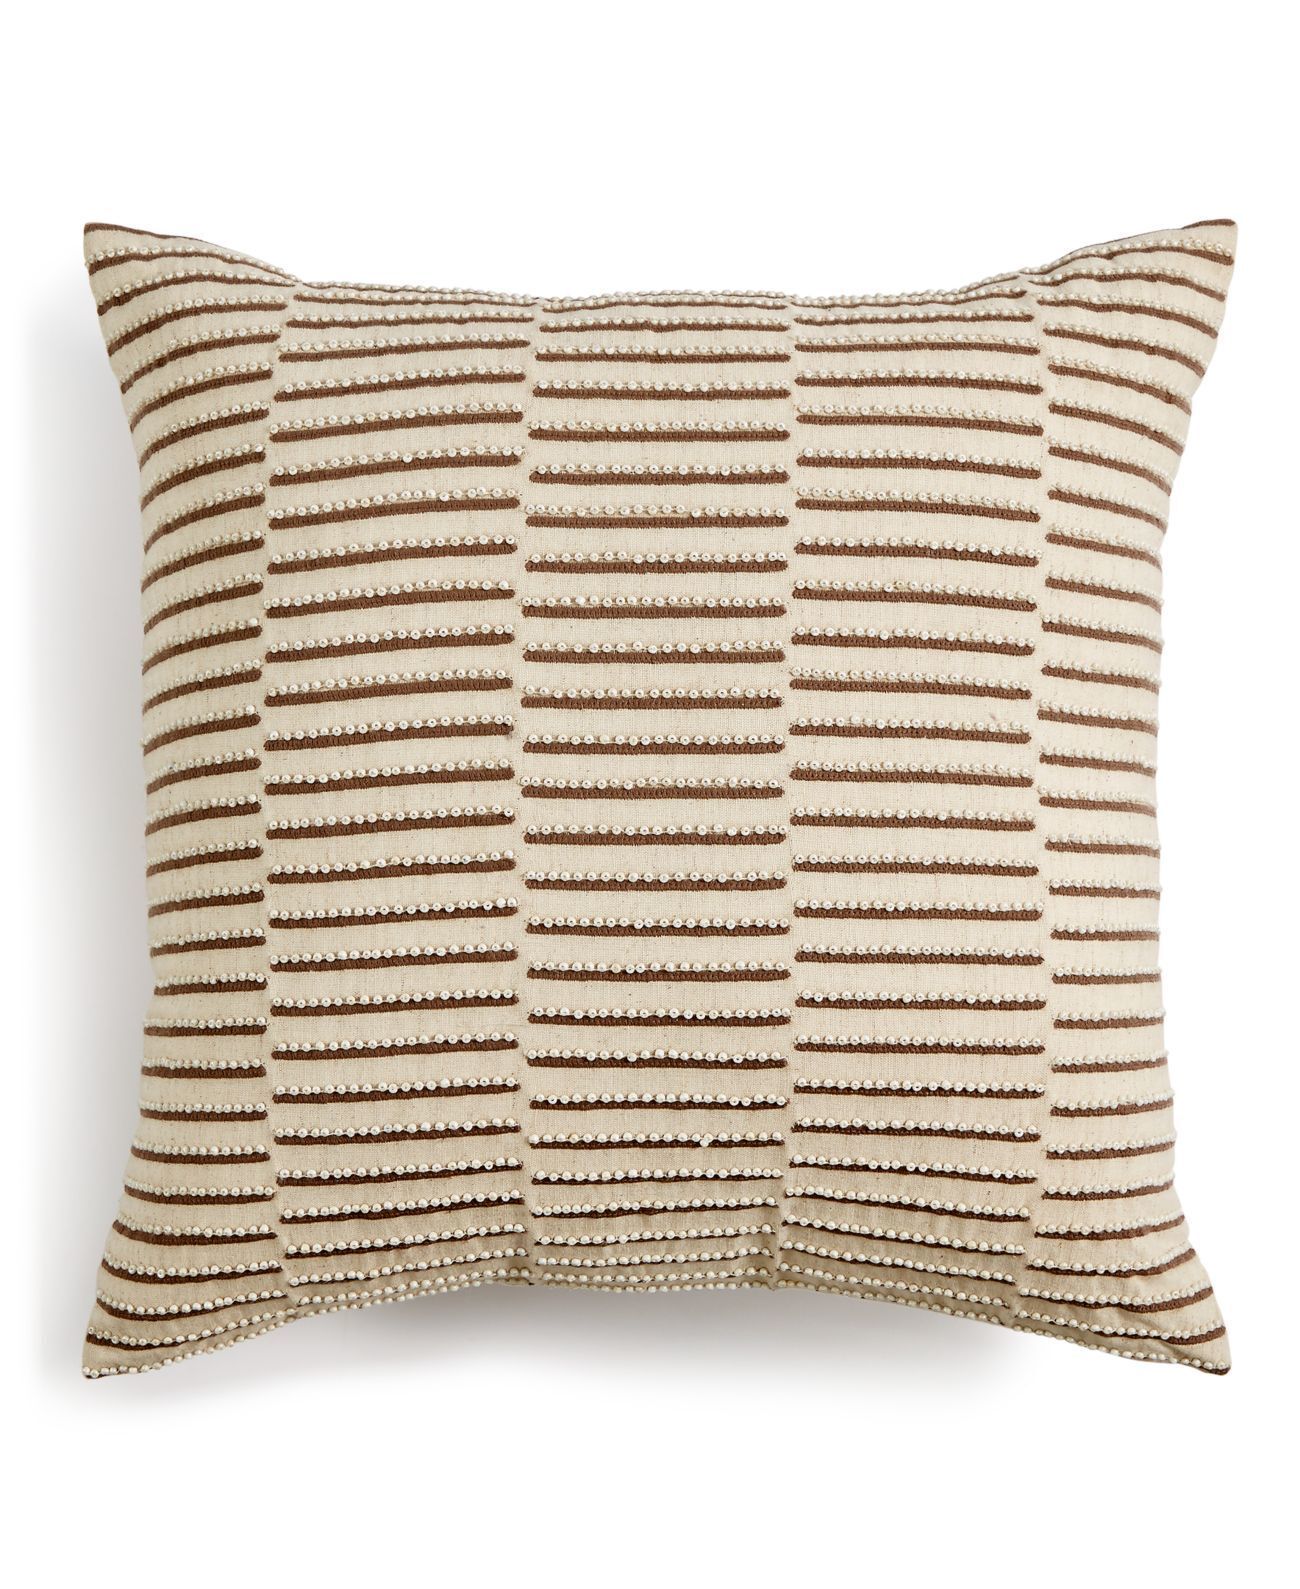 Hotel Collection Honeycomb Decorative Throw Pillow Size 18 x 18 Color Oatmeal - $48.51